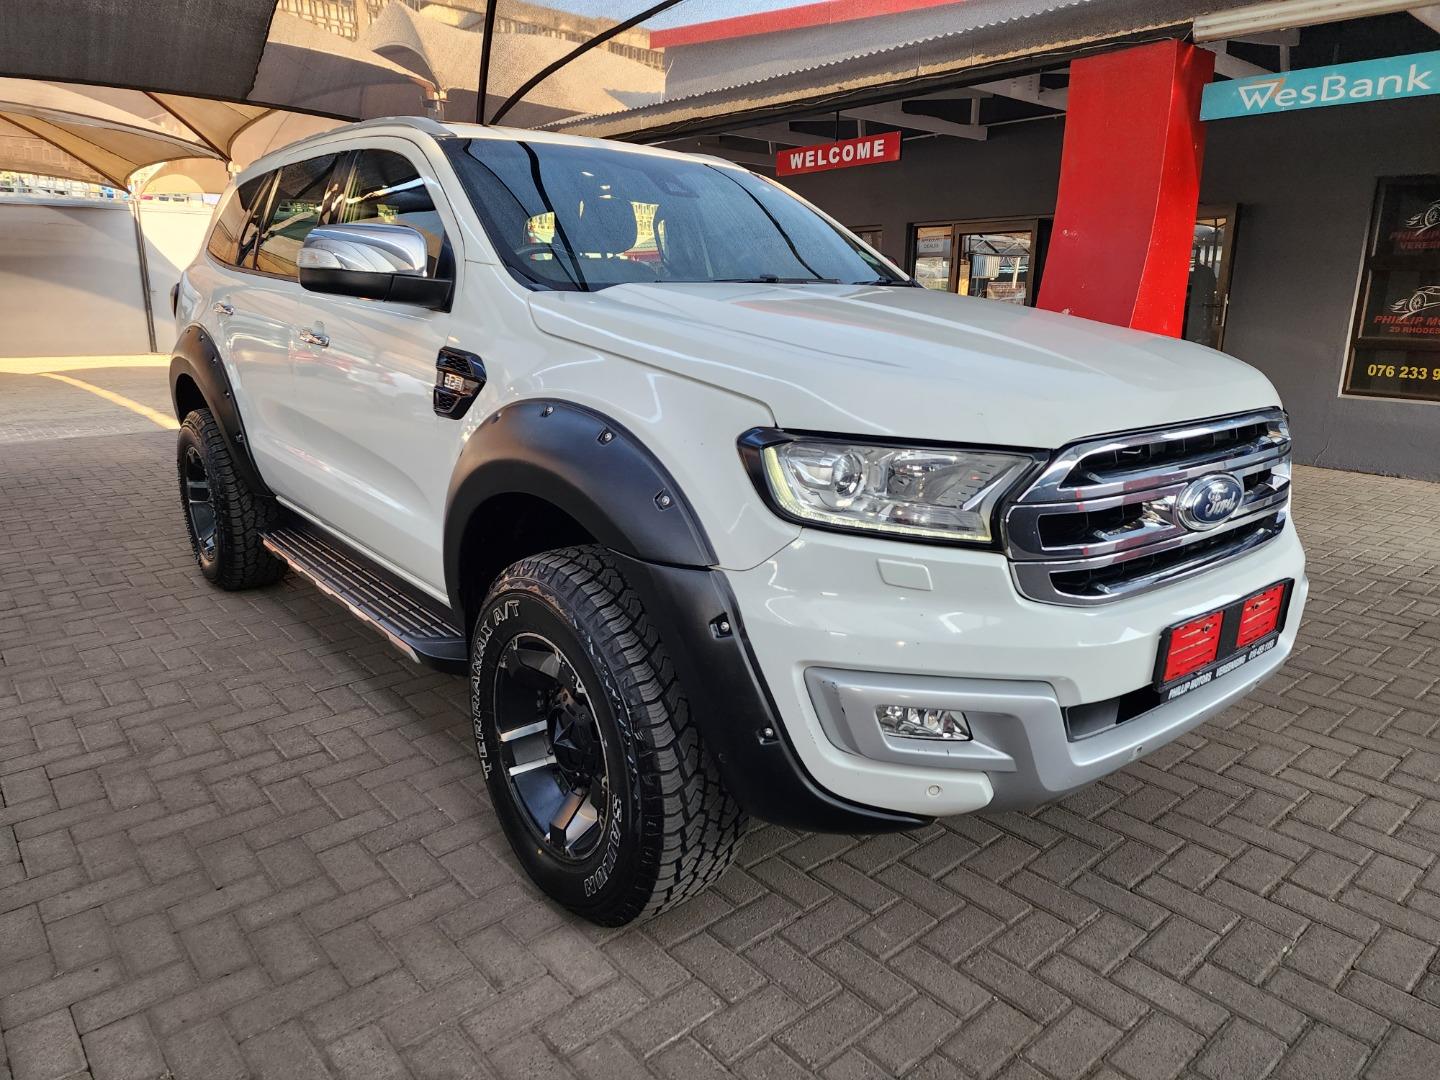 2015 Ford Everest 3.2TDCi 4WD Limited For Sale